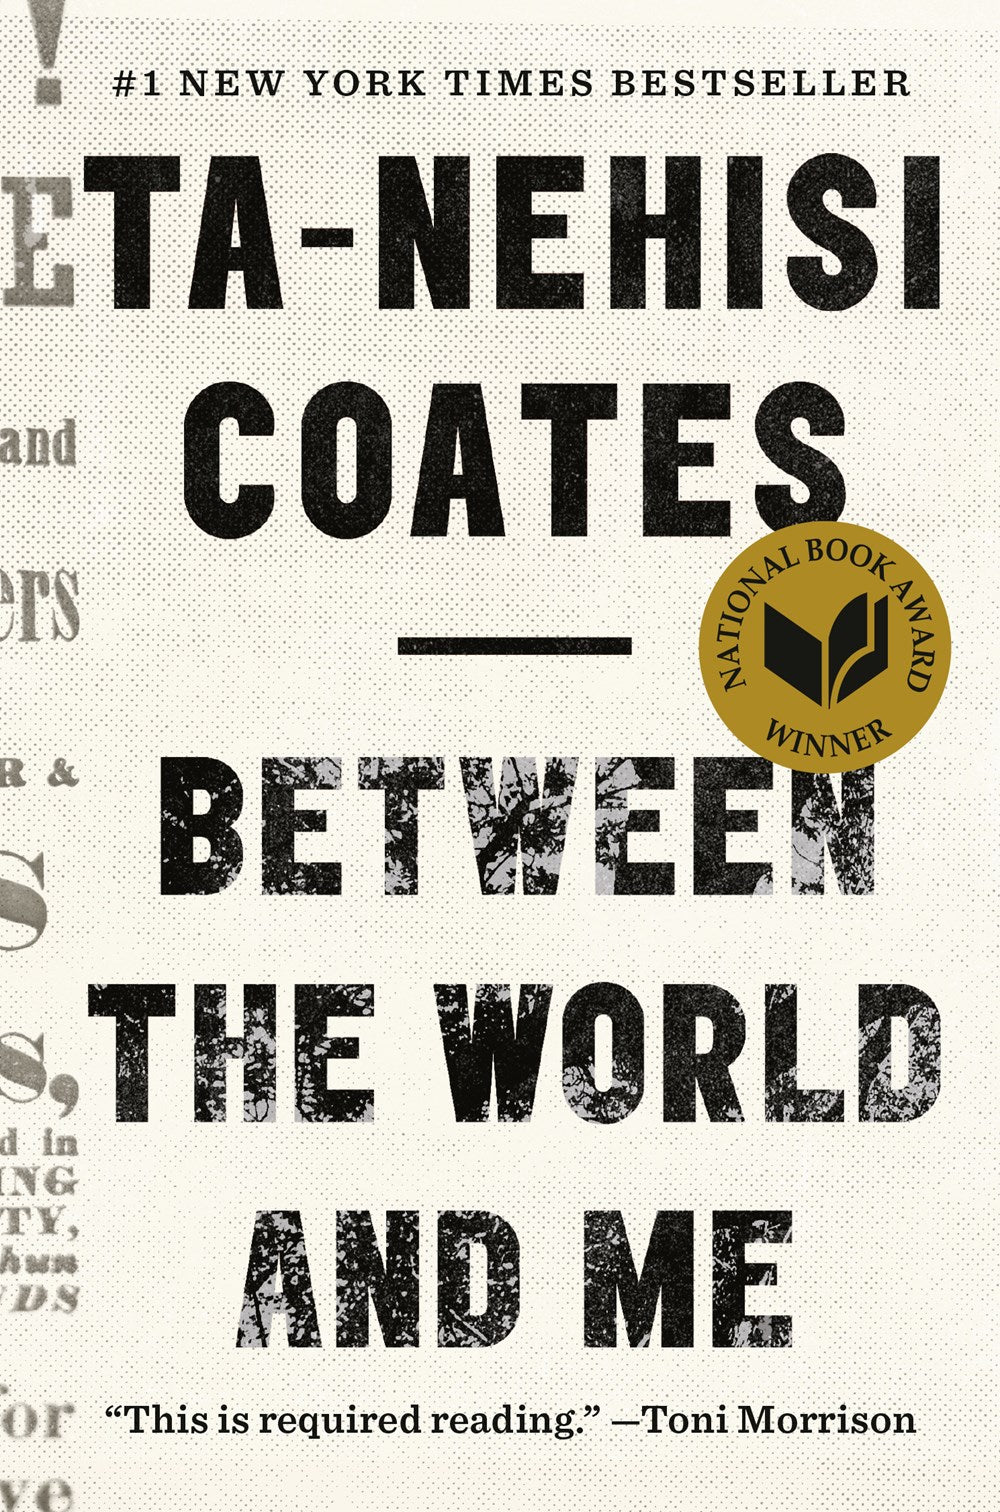 Between the World and Me : Notes on the First 150 Years in America